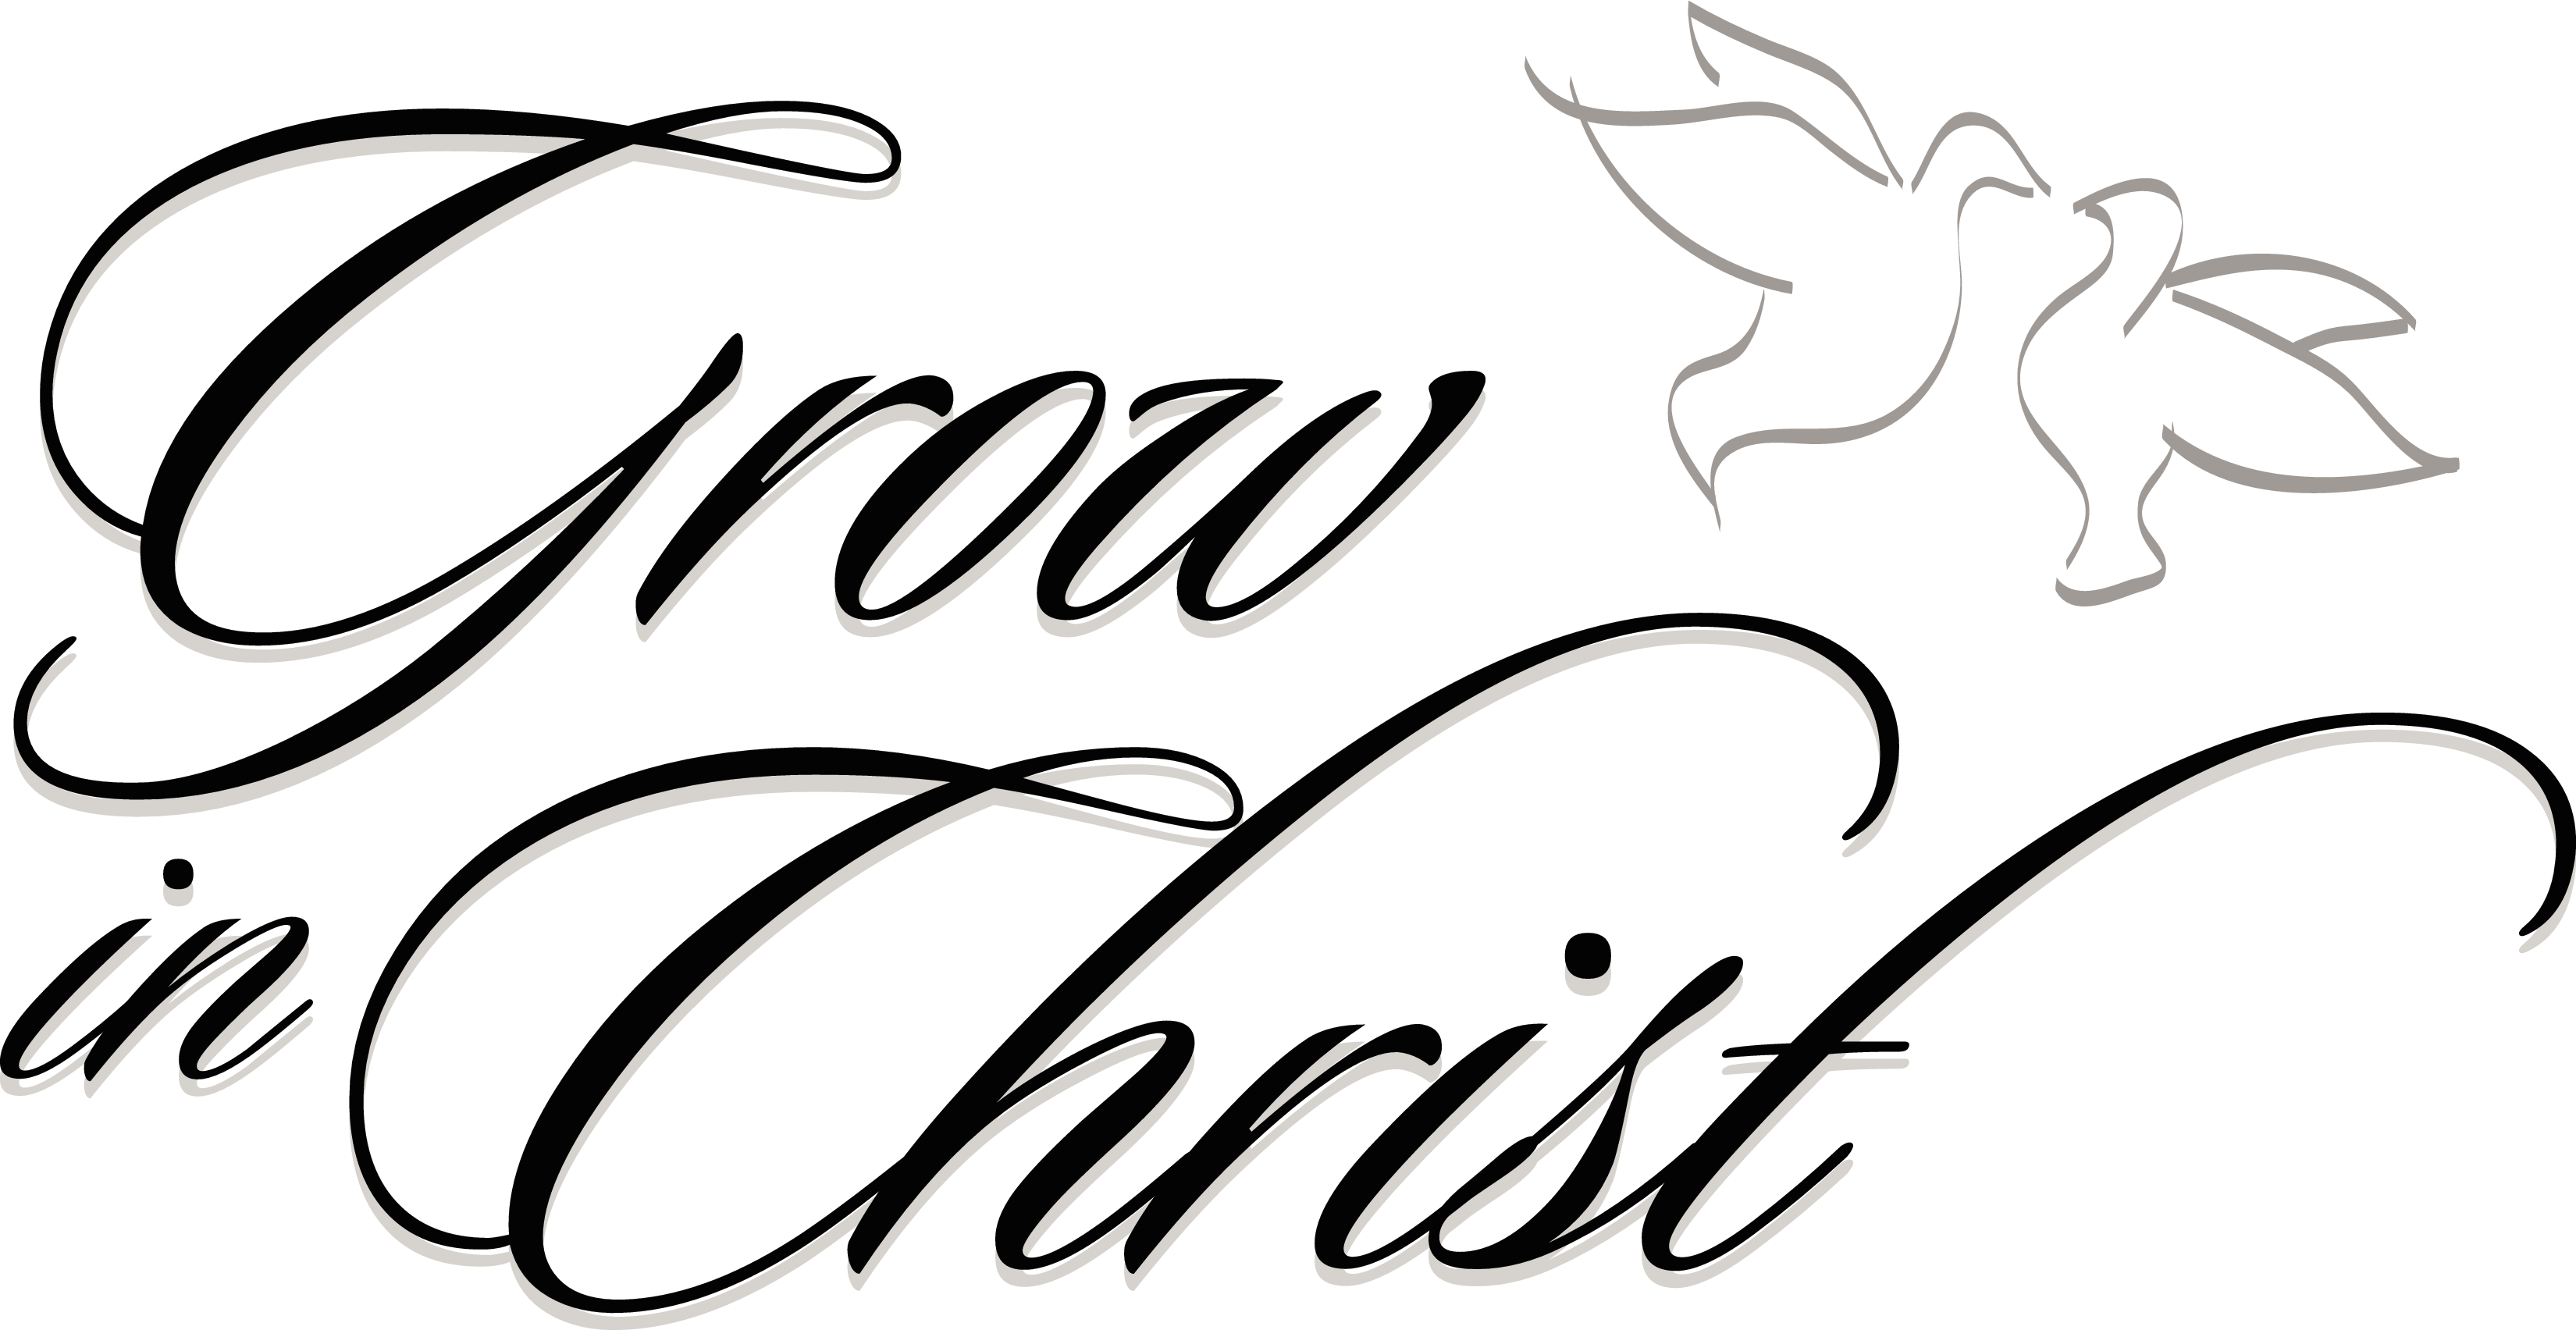 christian clipart free black and white - photo #7